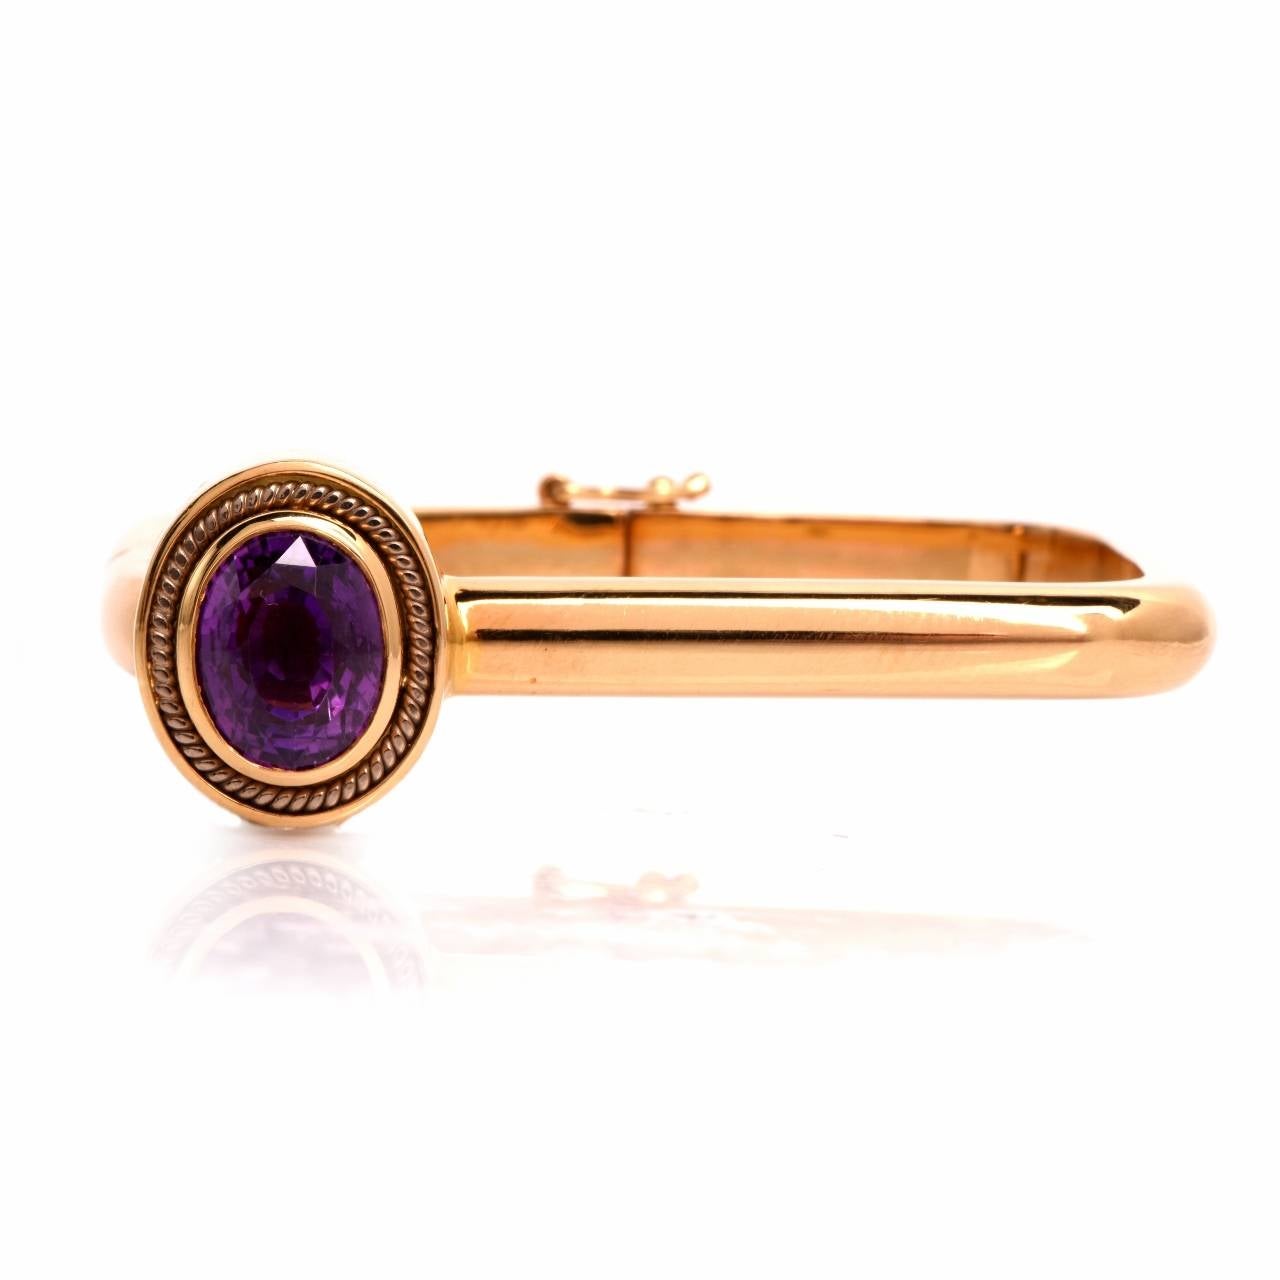 This vintage retro bangle bracelet of impressive avant garde design, is crafted in solid 18K yellow gold and weighs 35.00 grams. The bangle bracelet comprises  three immaculately hinged constituents, the upper one depicting an oval shape decor on